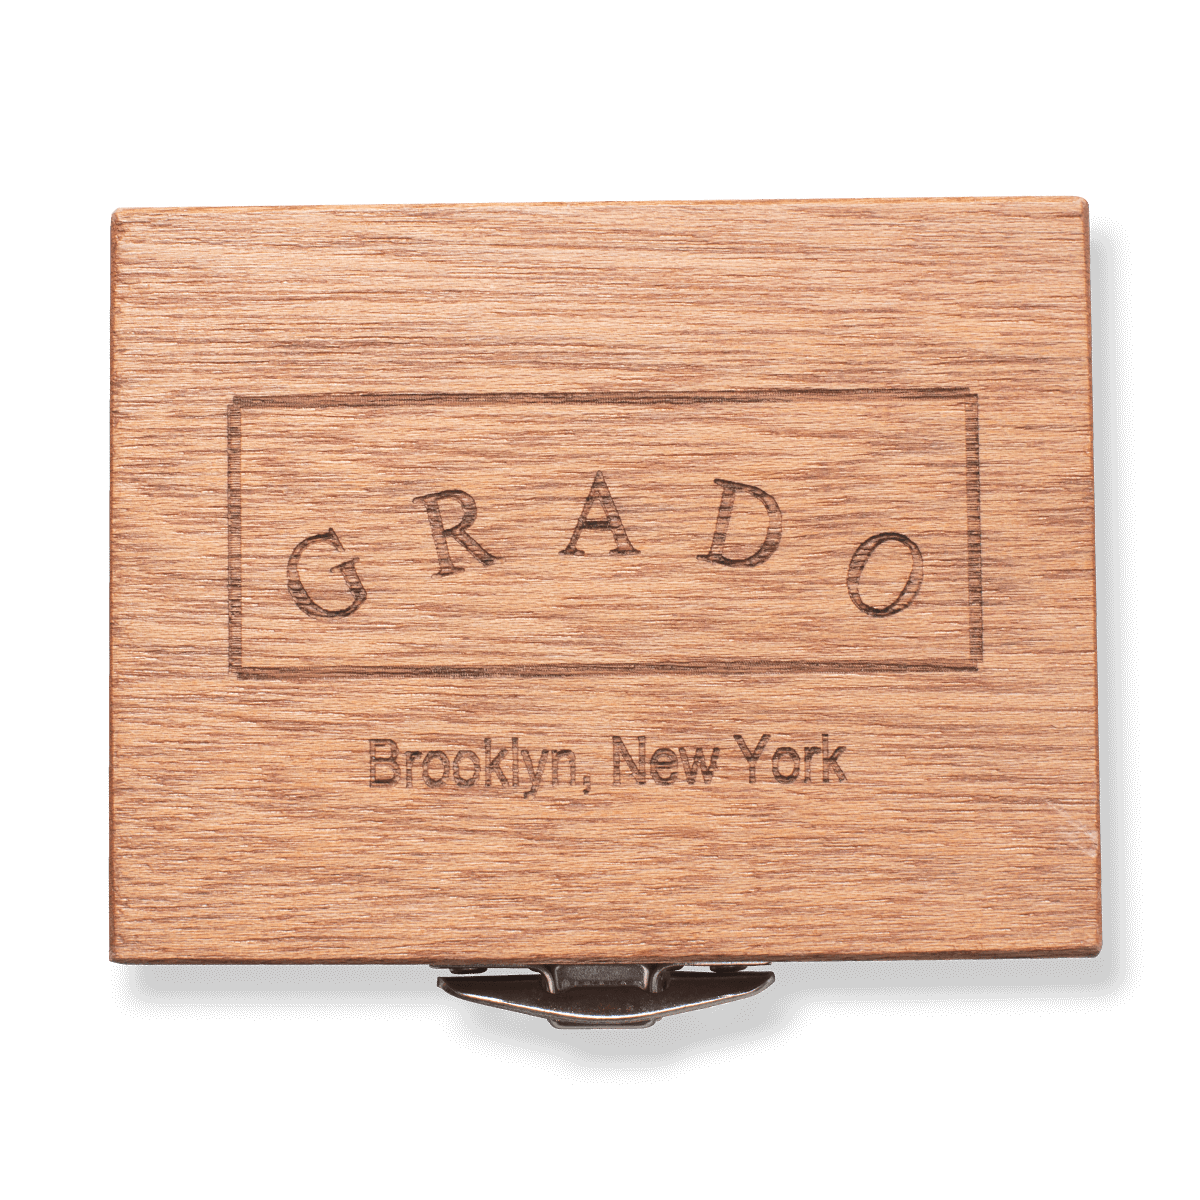 Grado Timbre Reference 3 Phono Cartridge | Turntables | Paragon Sight & Sound